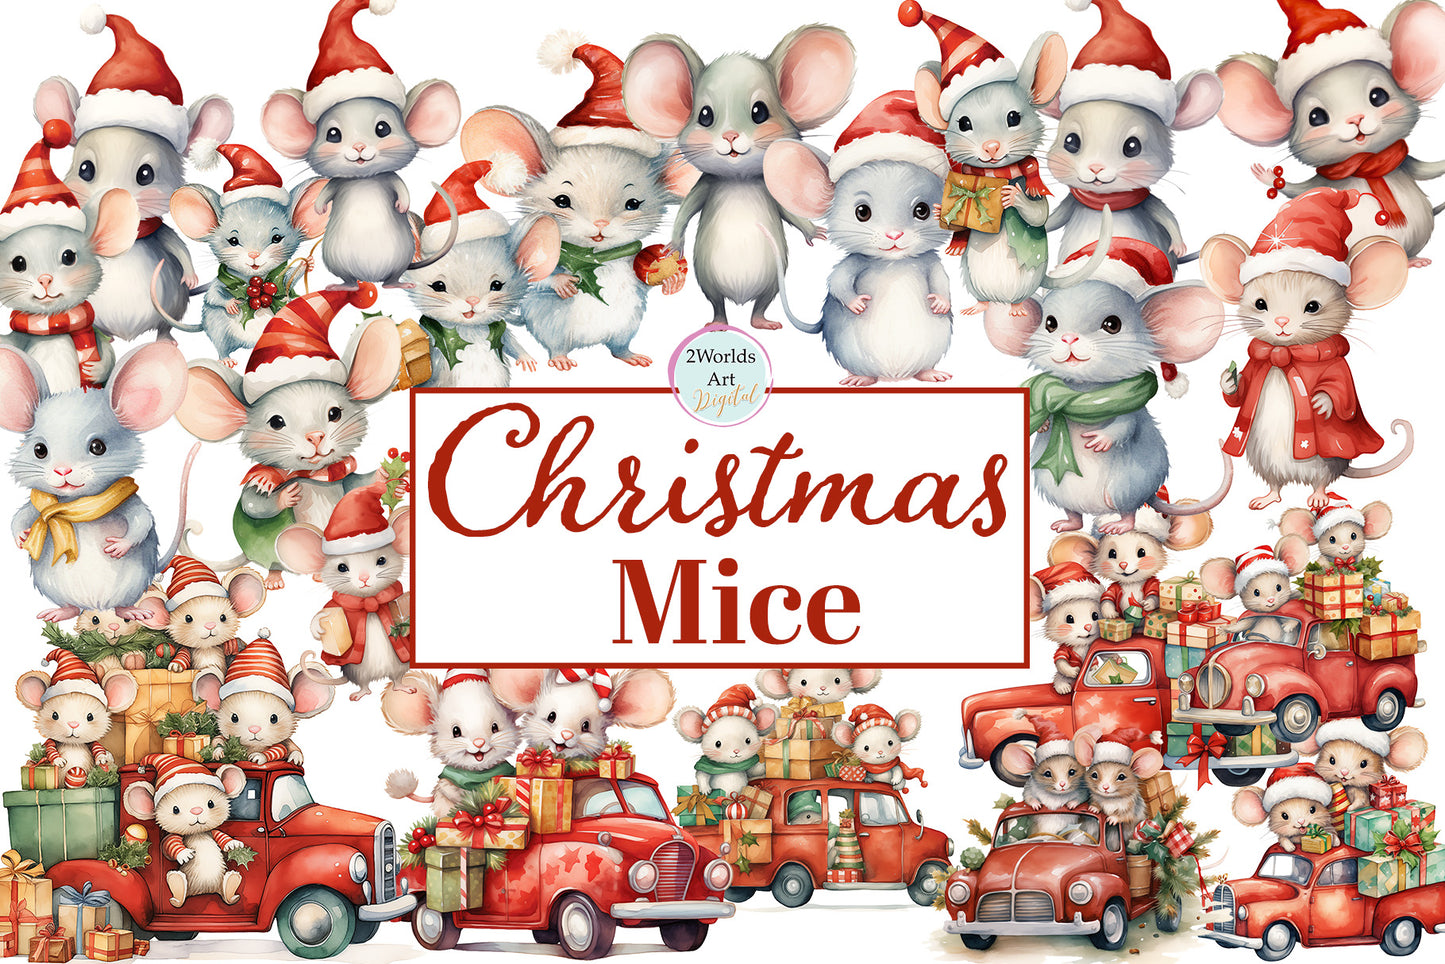 Chistmas Little Mice Clipart Digital Images